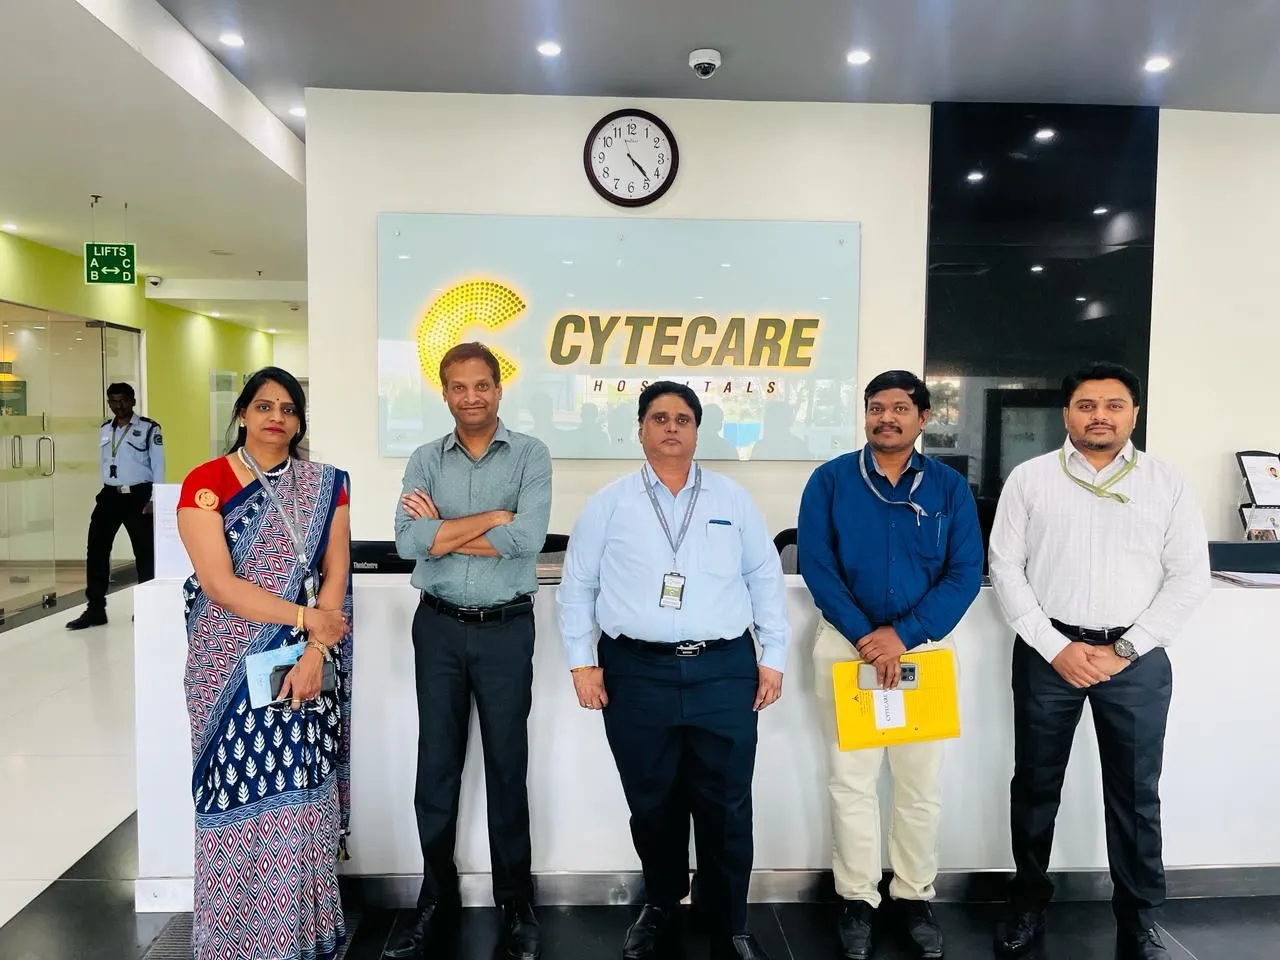 Airport Authority of India team at Cytecare Hospitals